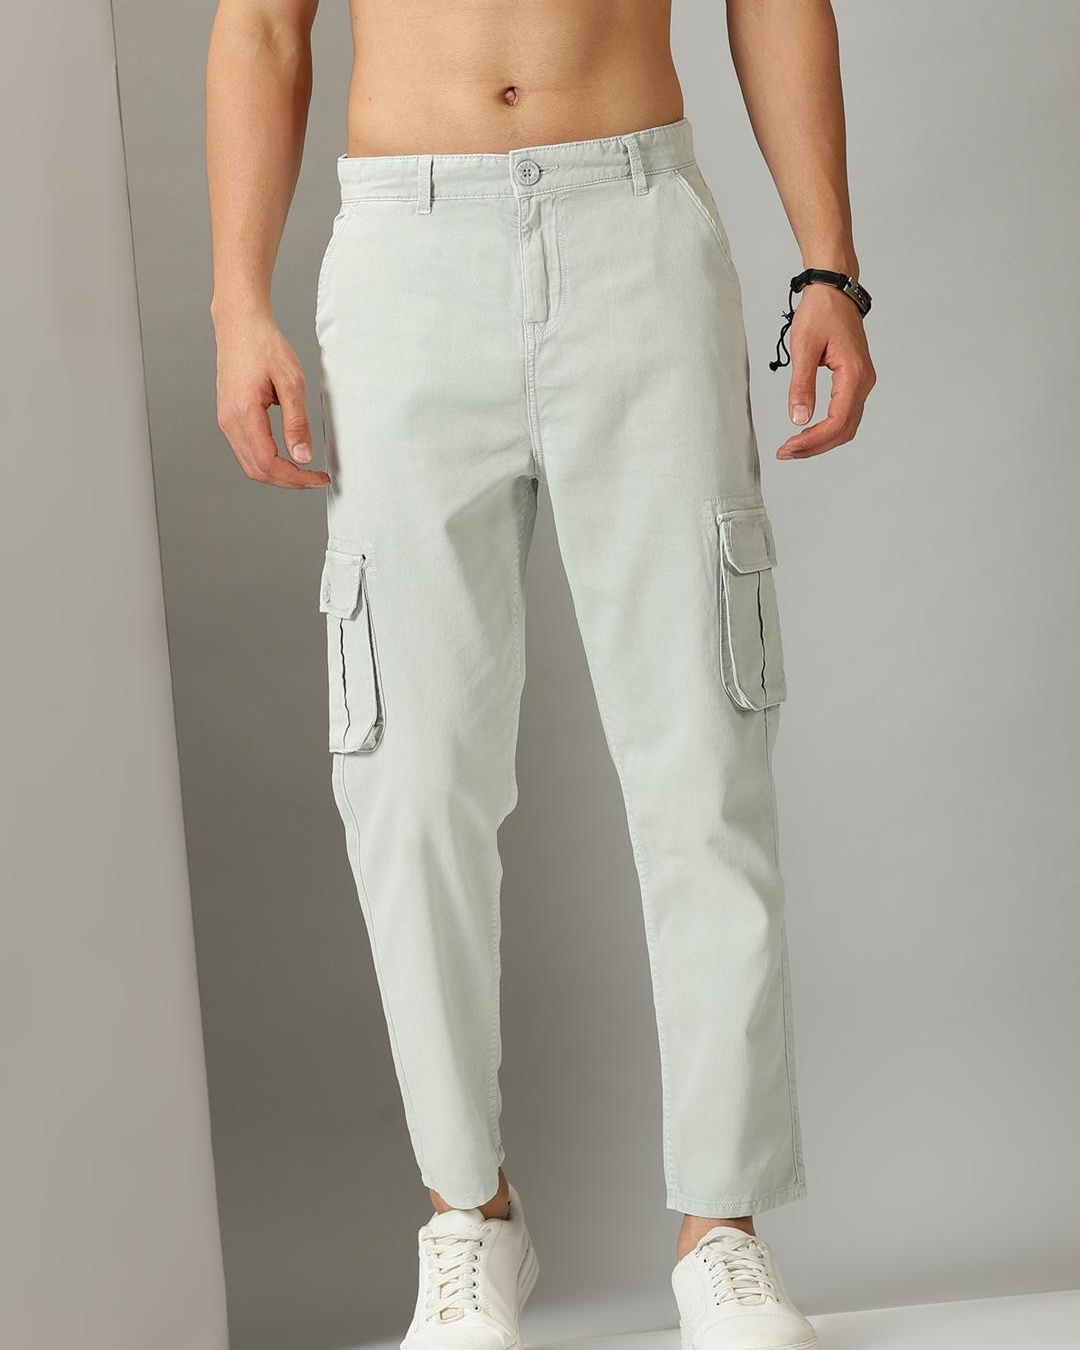 Relaxed Fit Cargo Trouser - BOSS - Smith & Caughey's - Smith & Caughey's